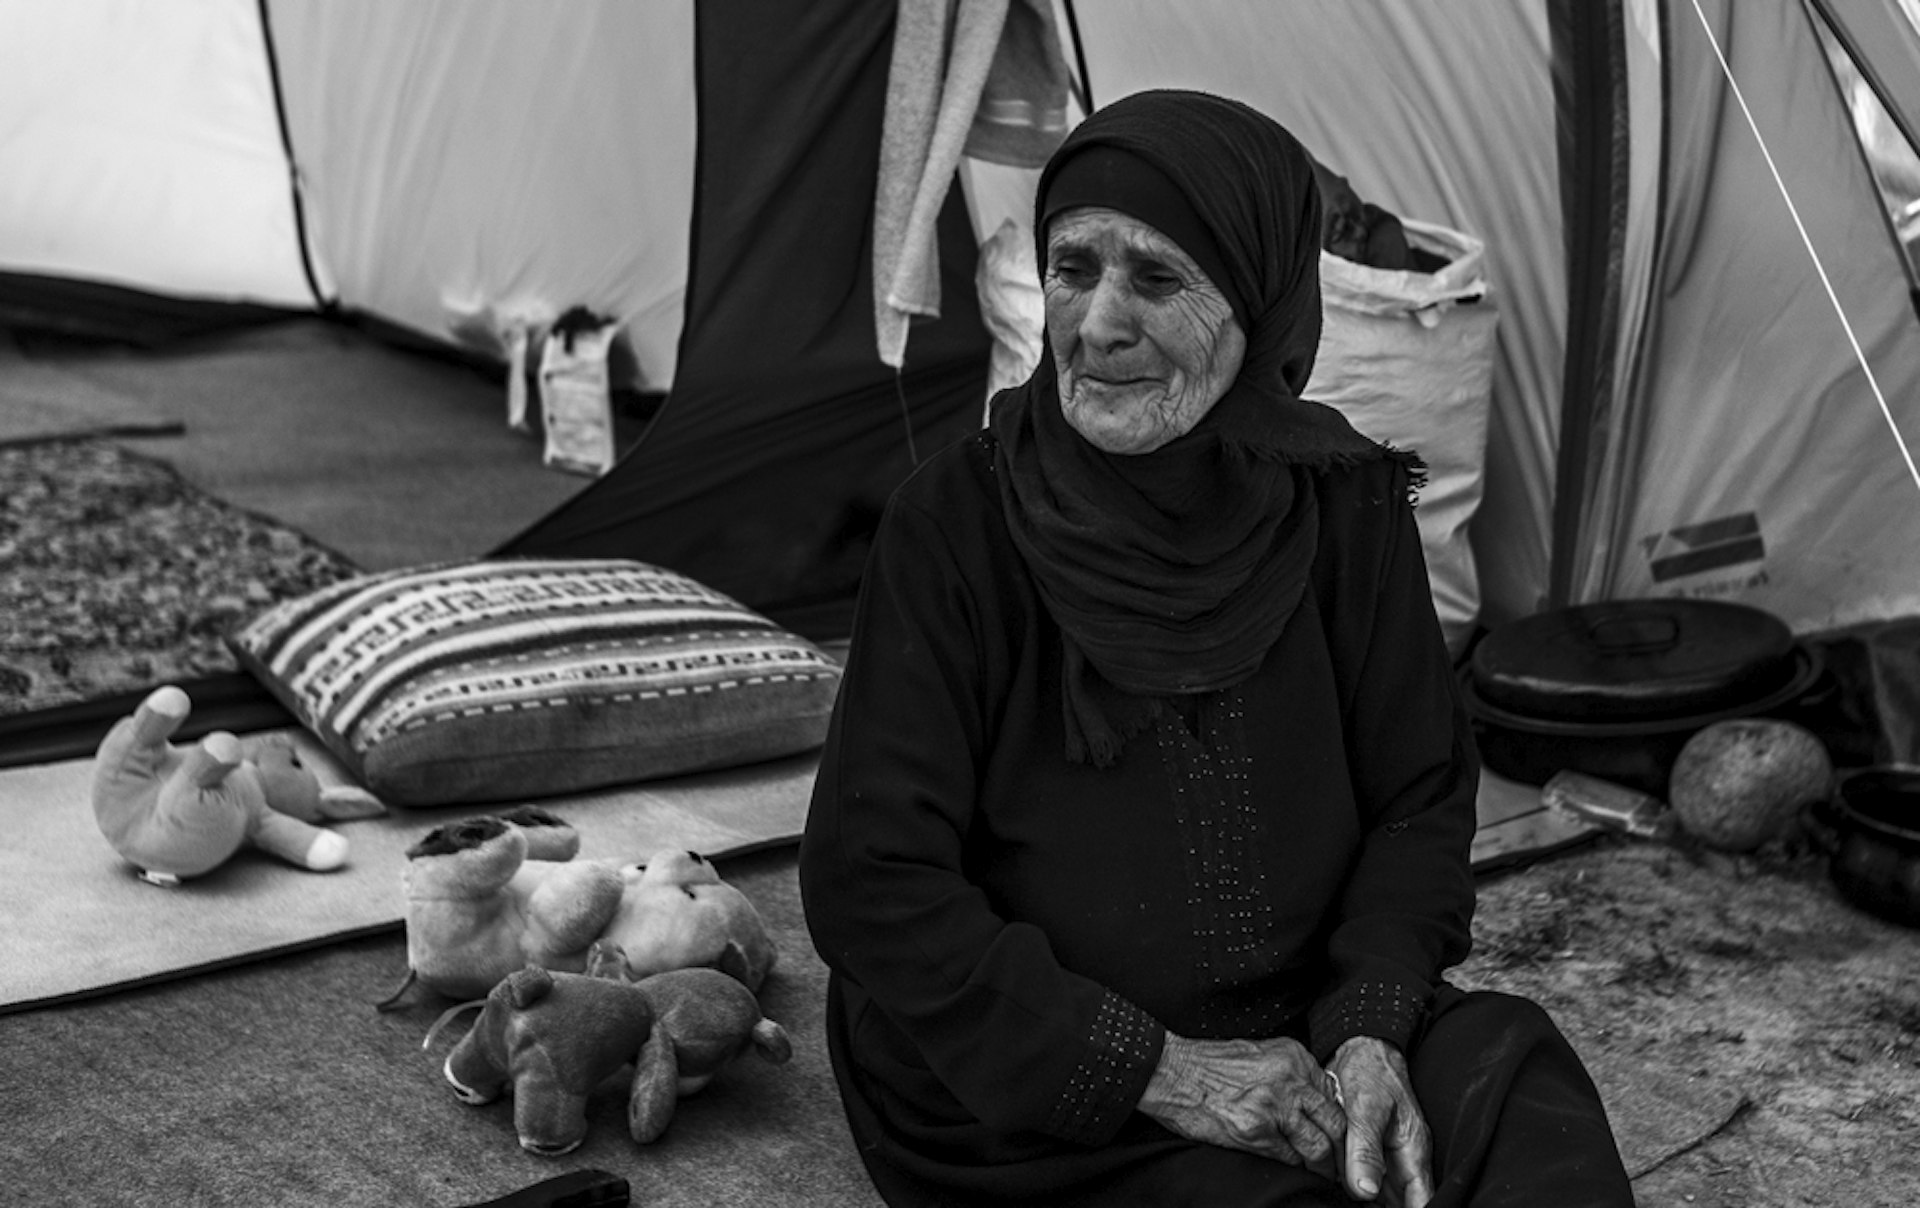 Aseel from Homs, Syria sits in the entrance to her tent in Idomeni.